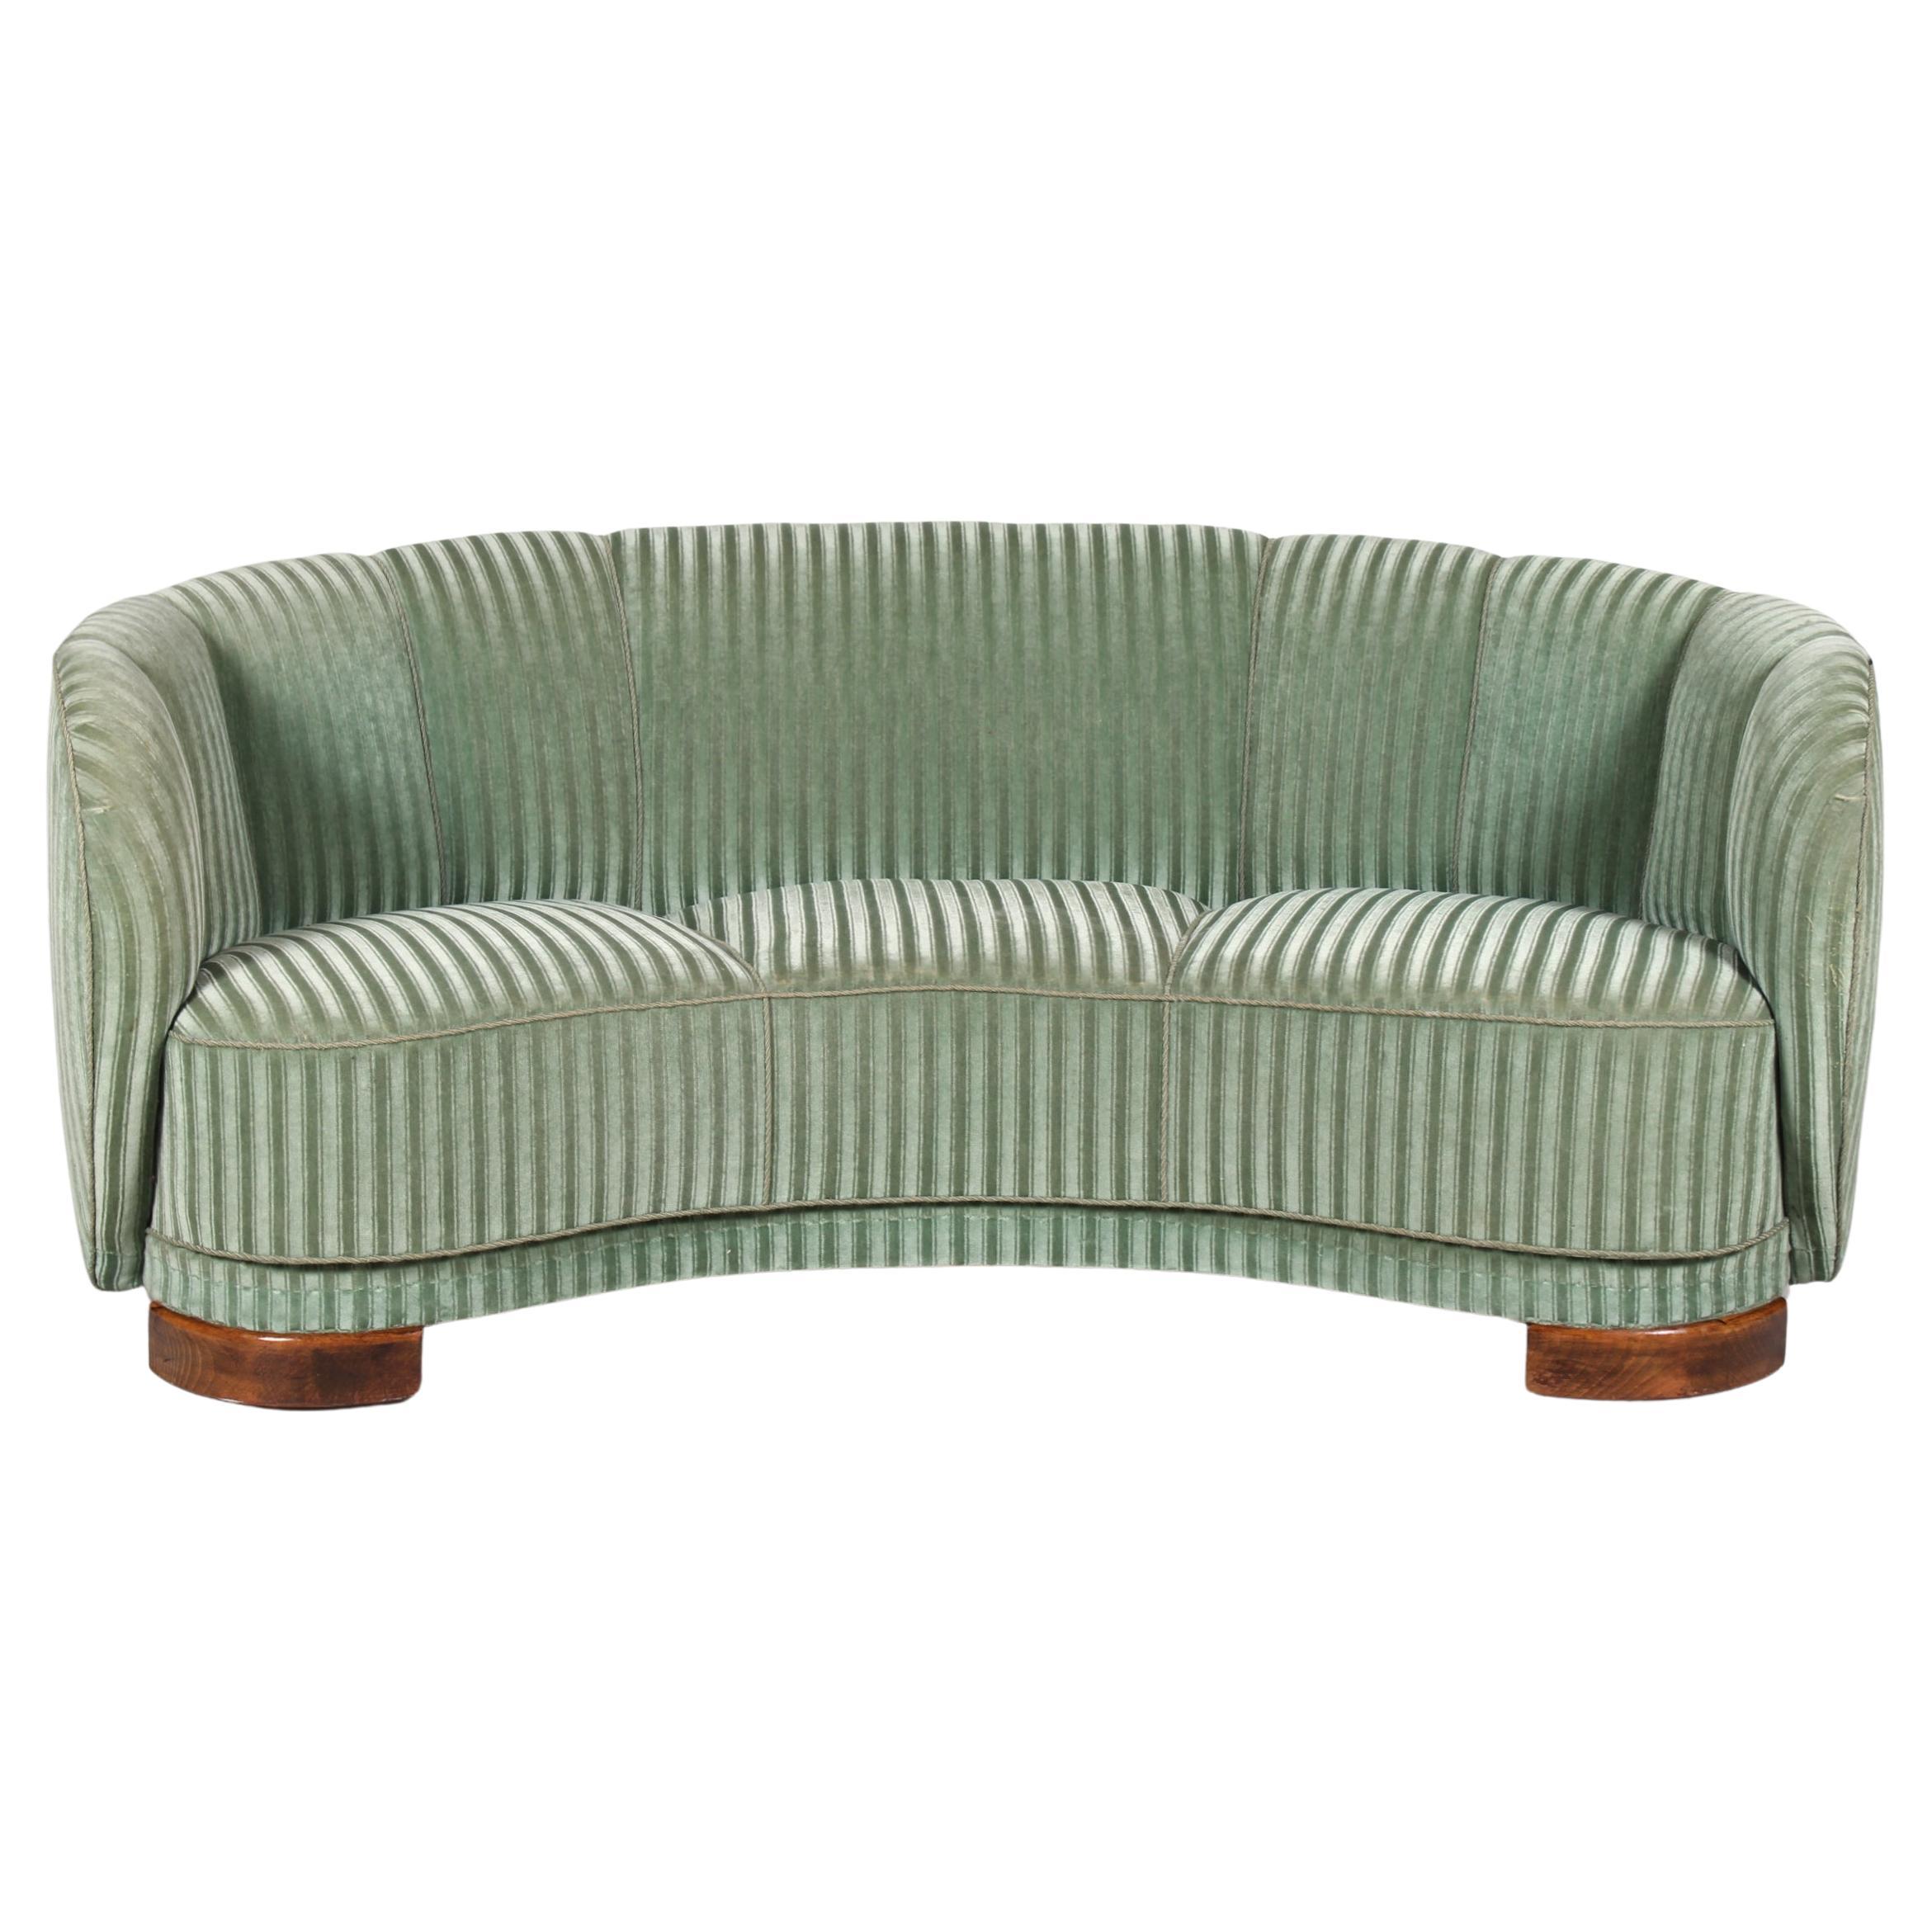 Danish Art Deco Curved Banana Sofa Upholstered with Green Striped Velour, 1940s